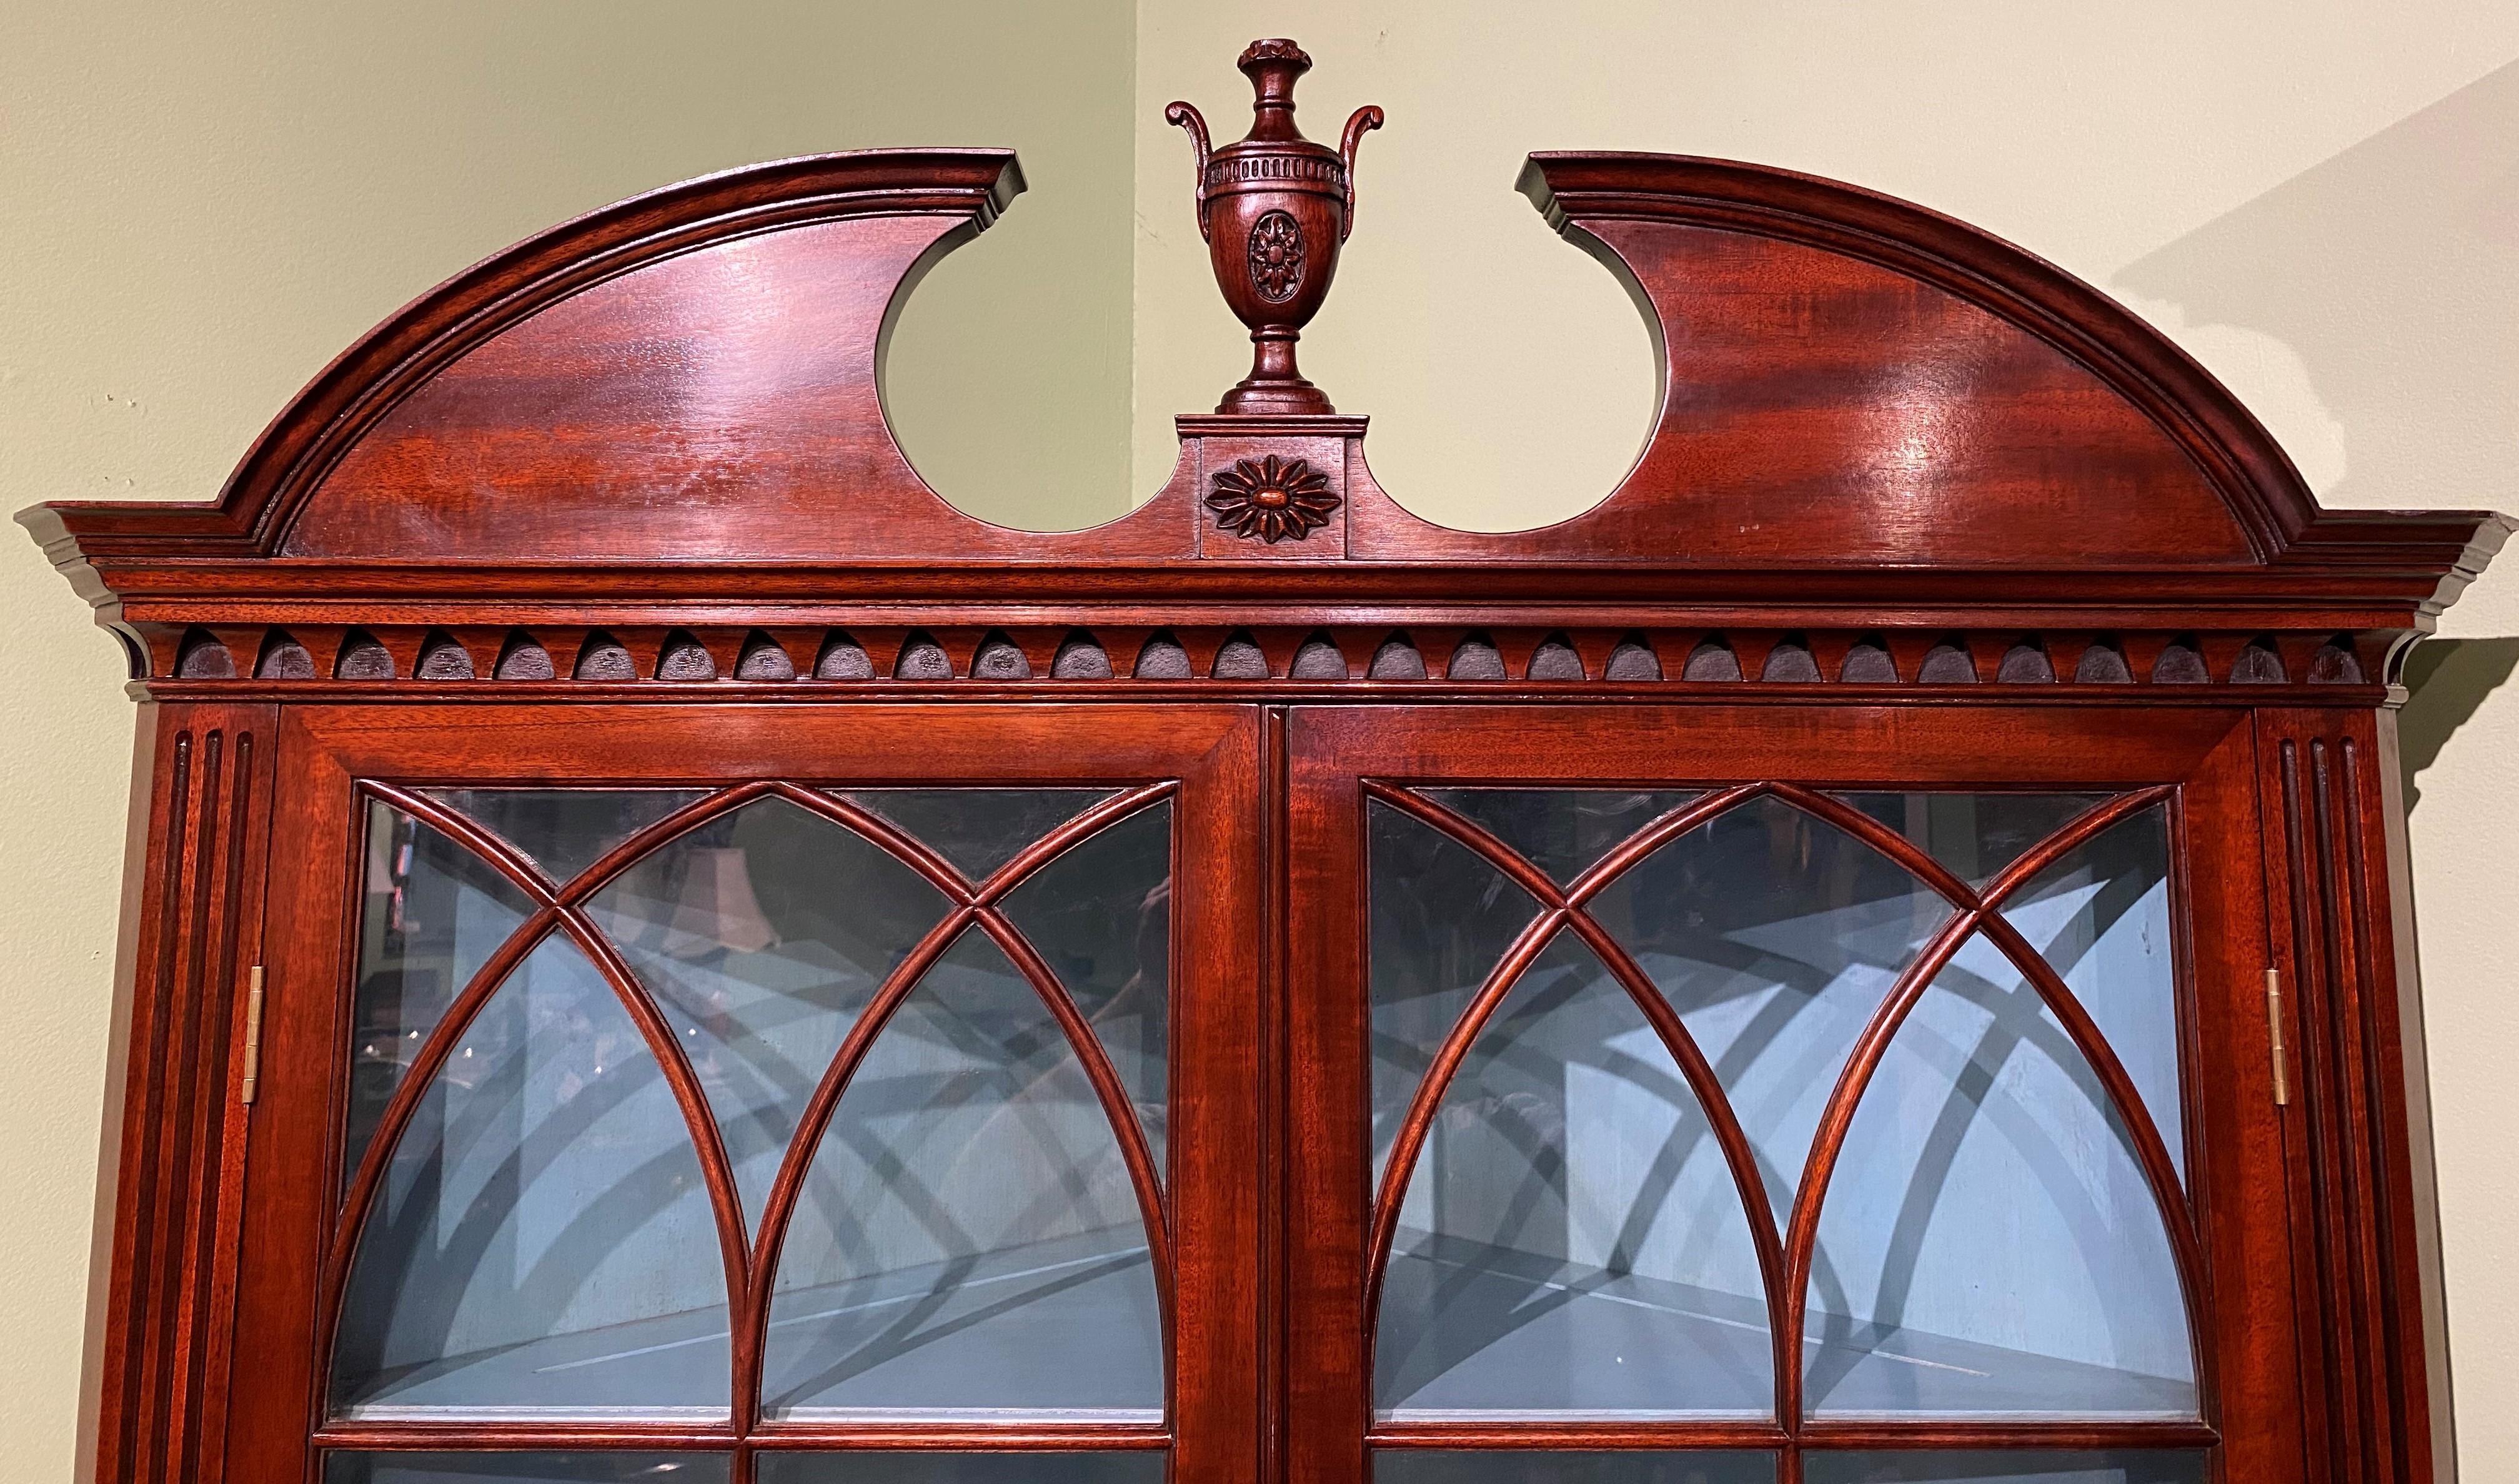 A fine quality custom mahogany one piece corner cabinet, its set back upper case with a broken pediment arched crest with central urn finial surmounting two glass doors opening to a light blue three shelf interior over a lower case with two curved